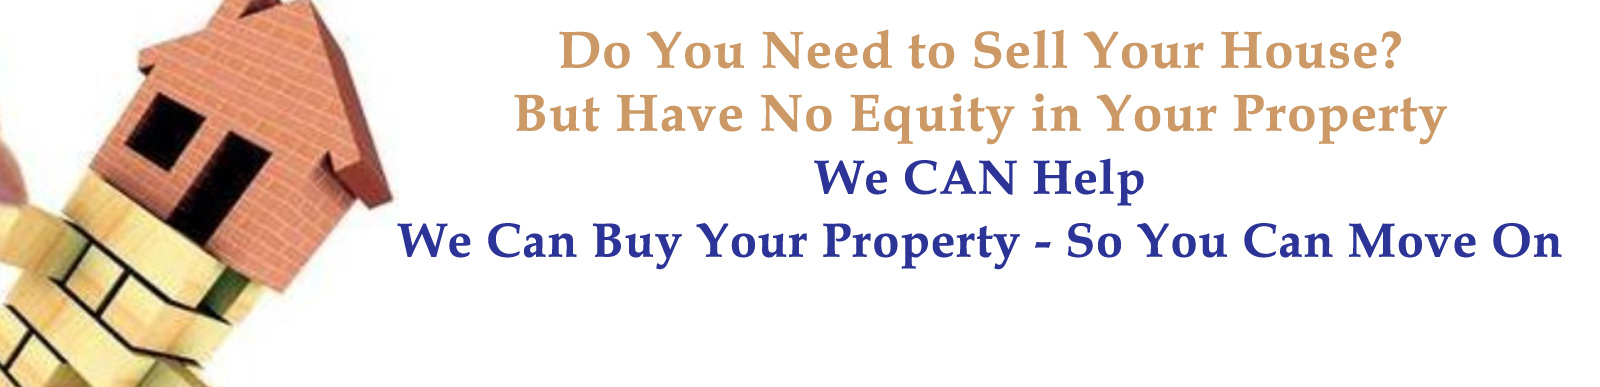 No Equity - We can still help 